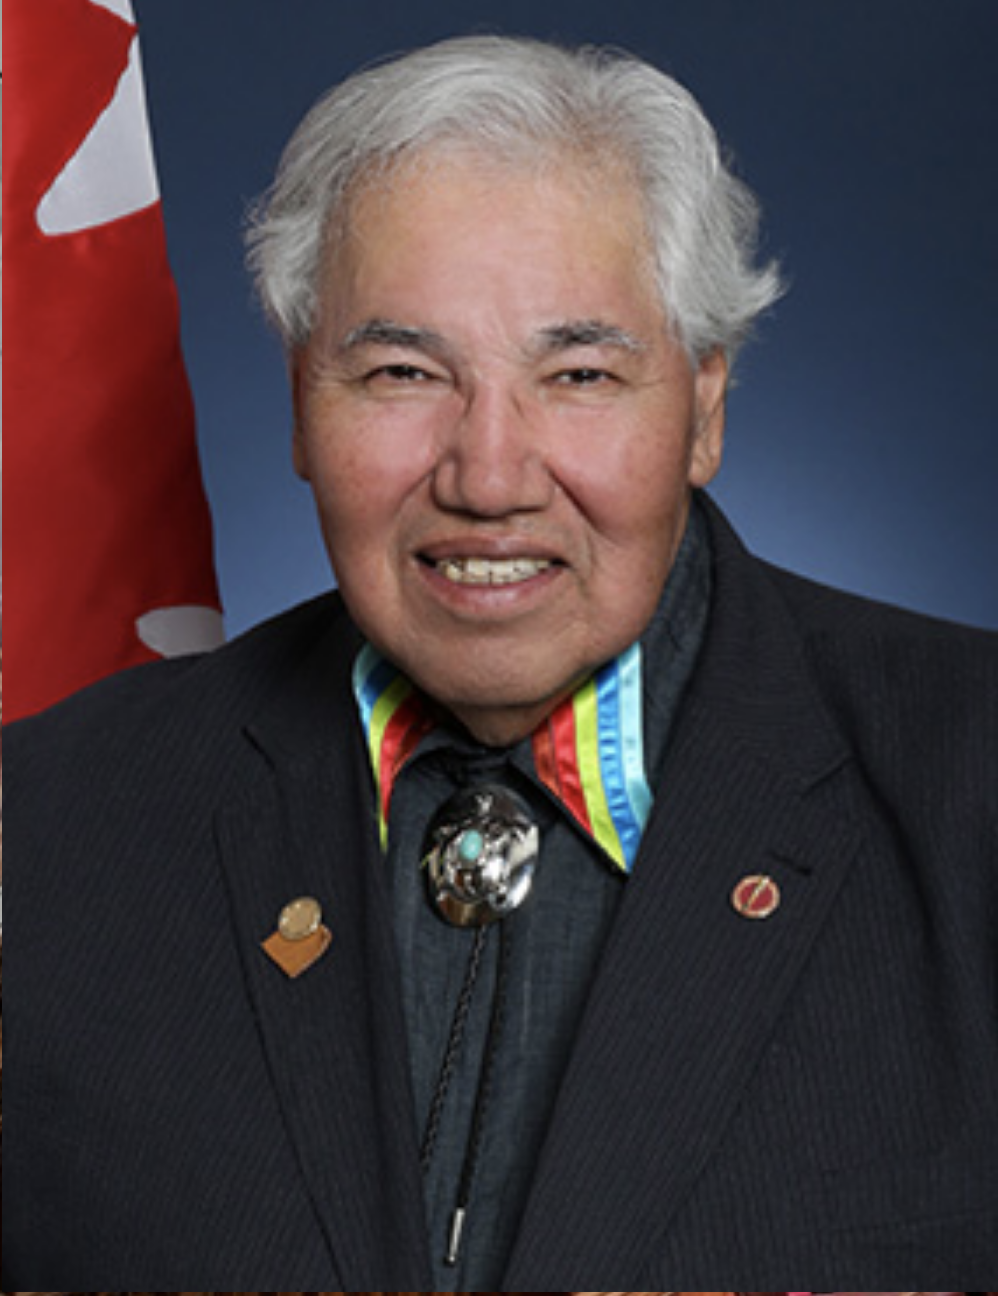 Senator Murray Sinclair, chief commissioner of the Truth and Reconciliation Commission, headlines an impressive list of keynote speakers during the conference.